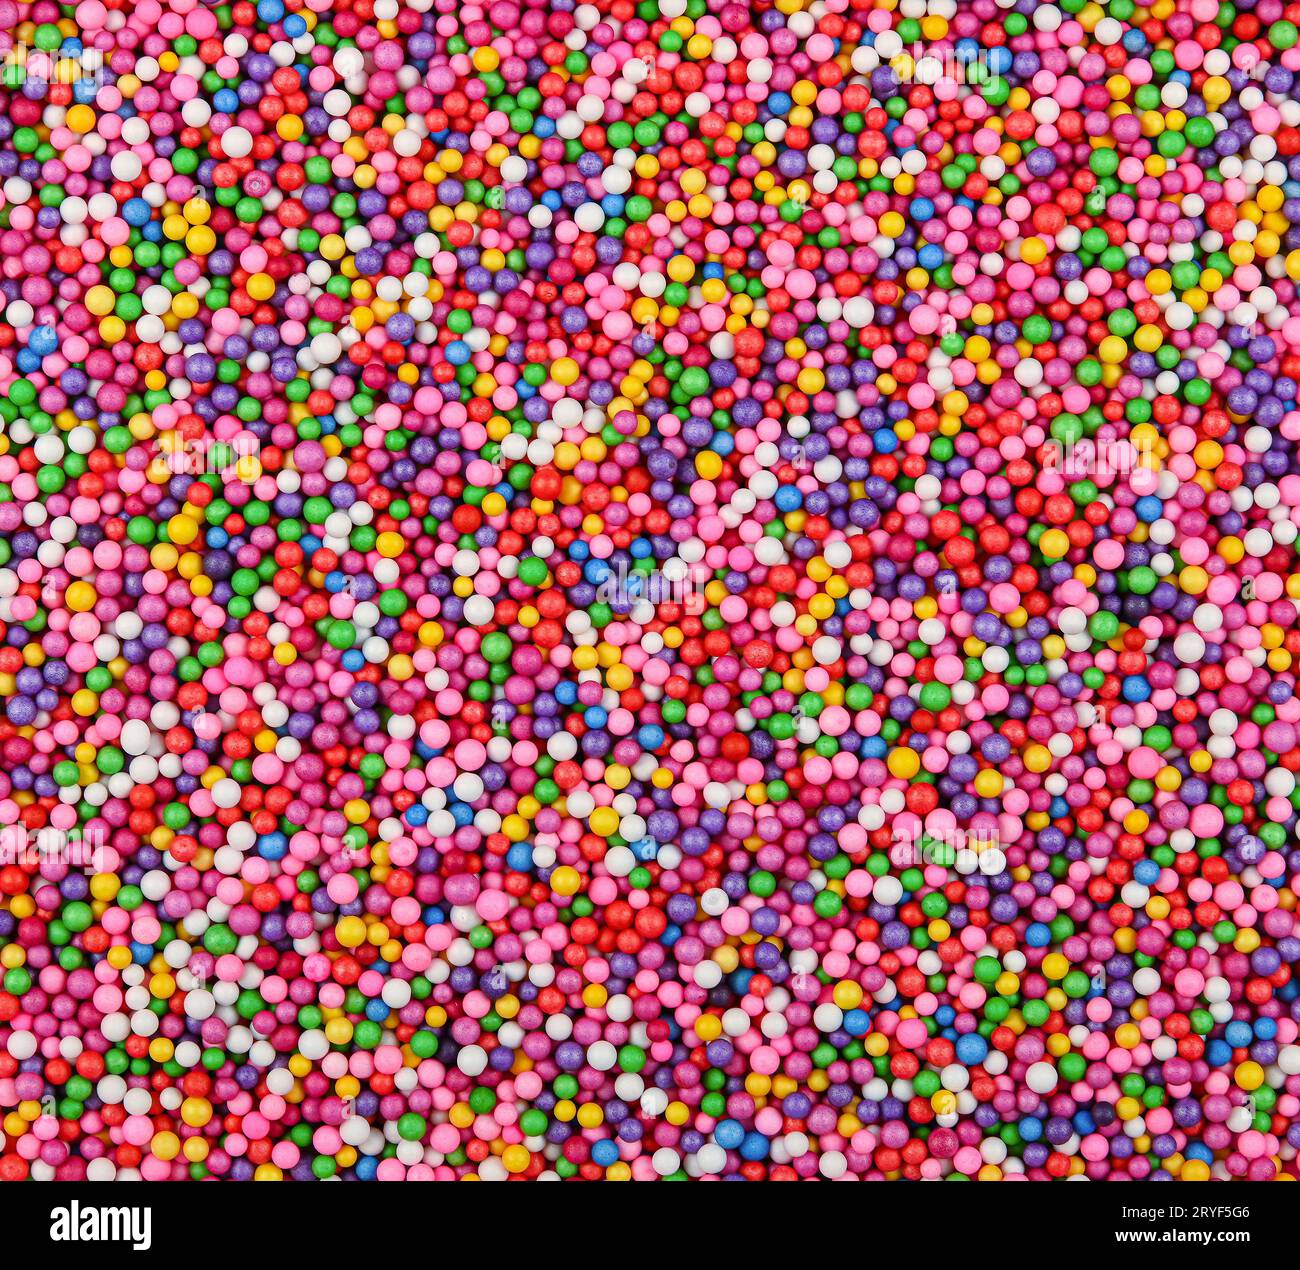 Background of colorful expanded polystyrene balls Stock Photo